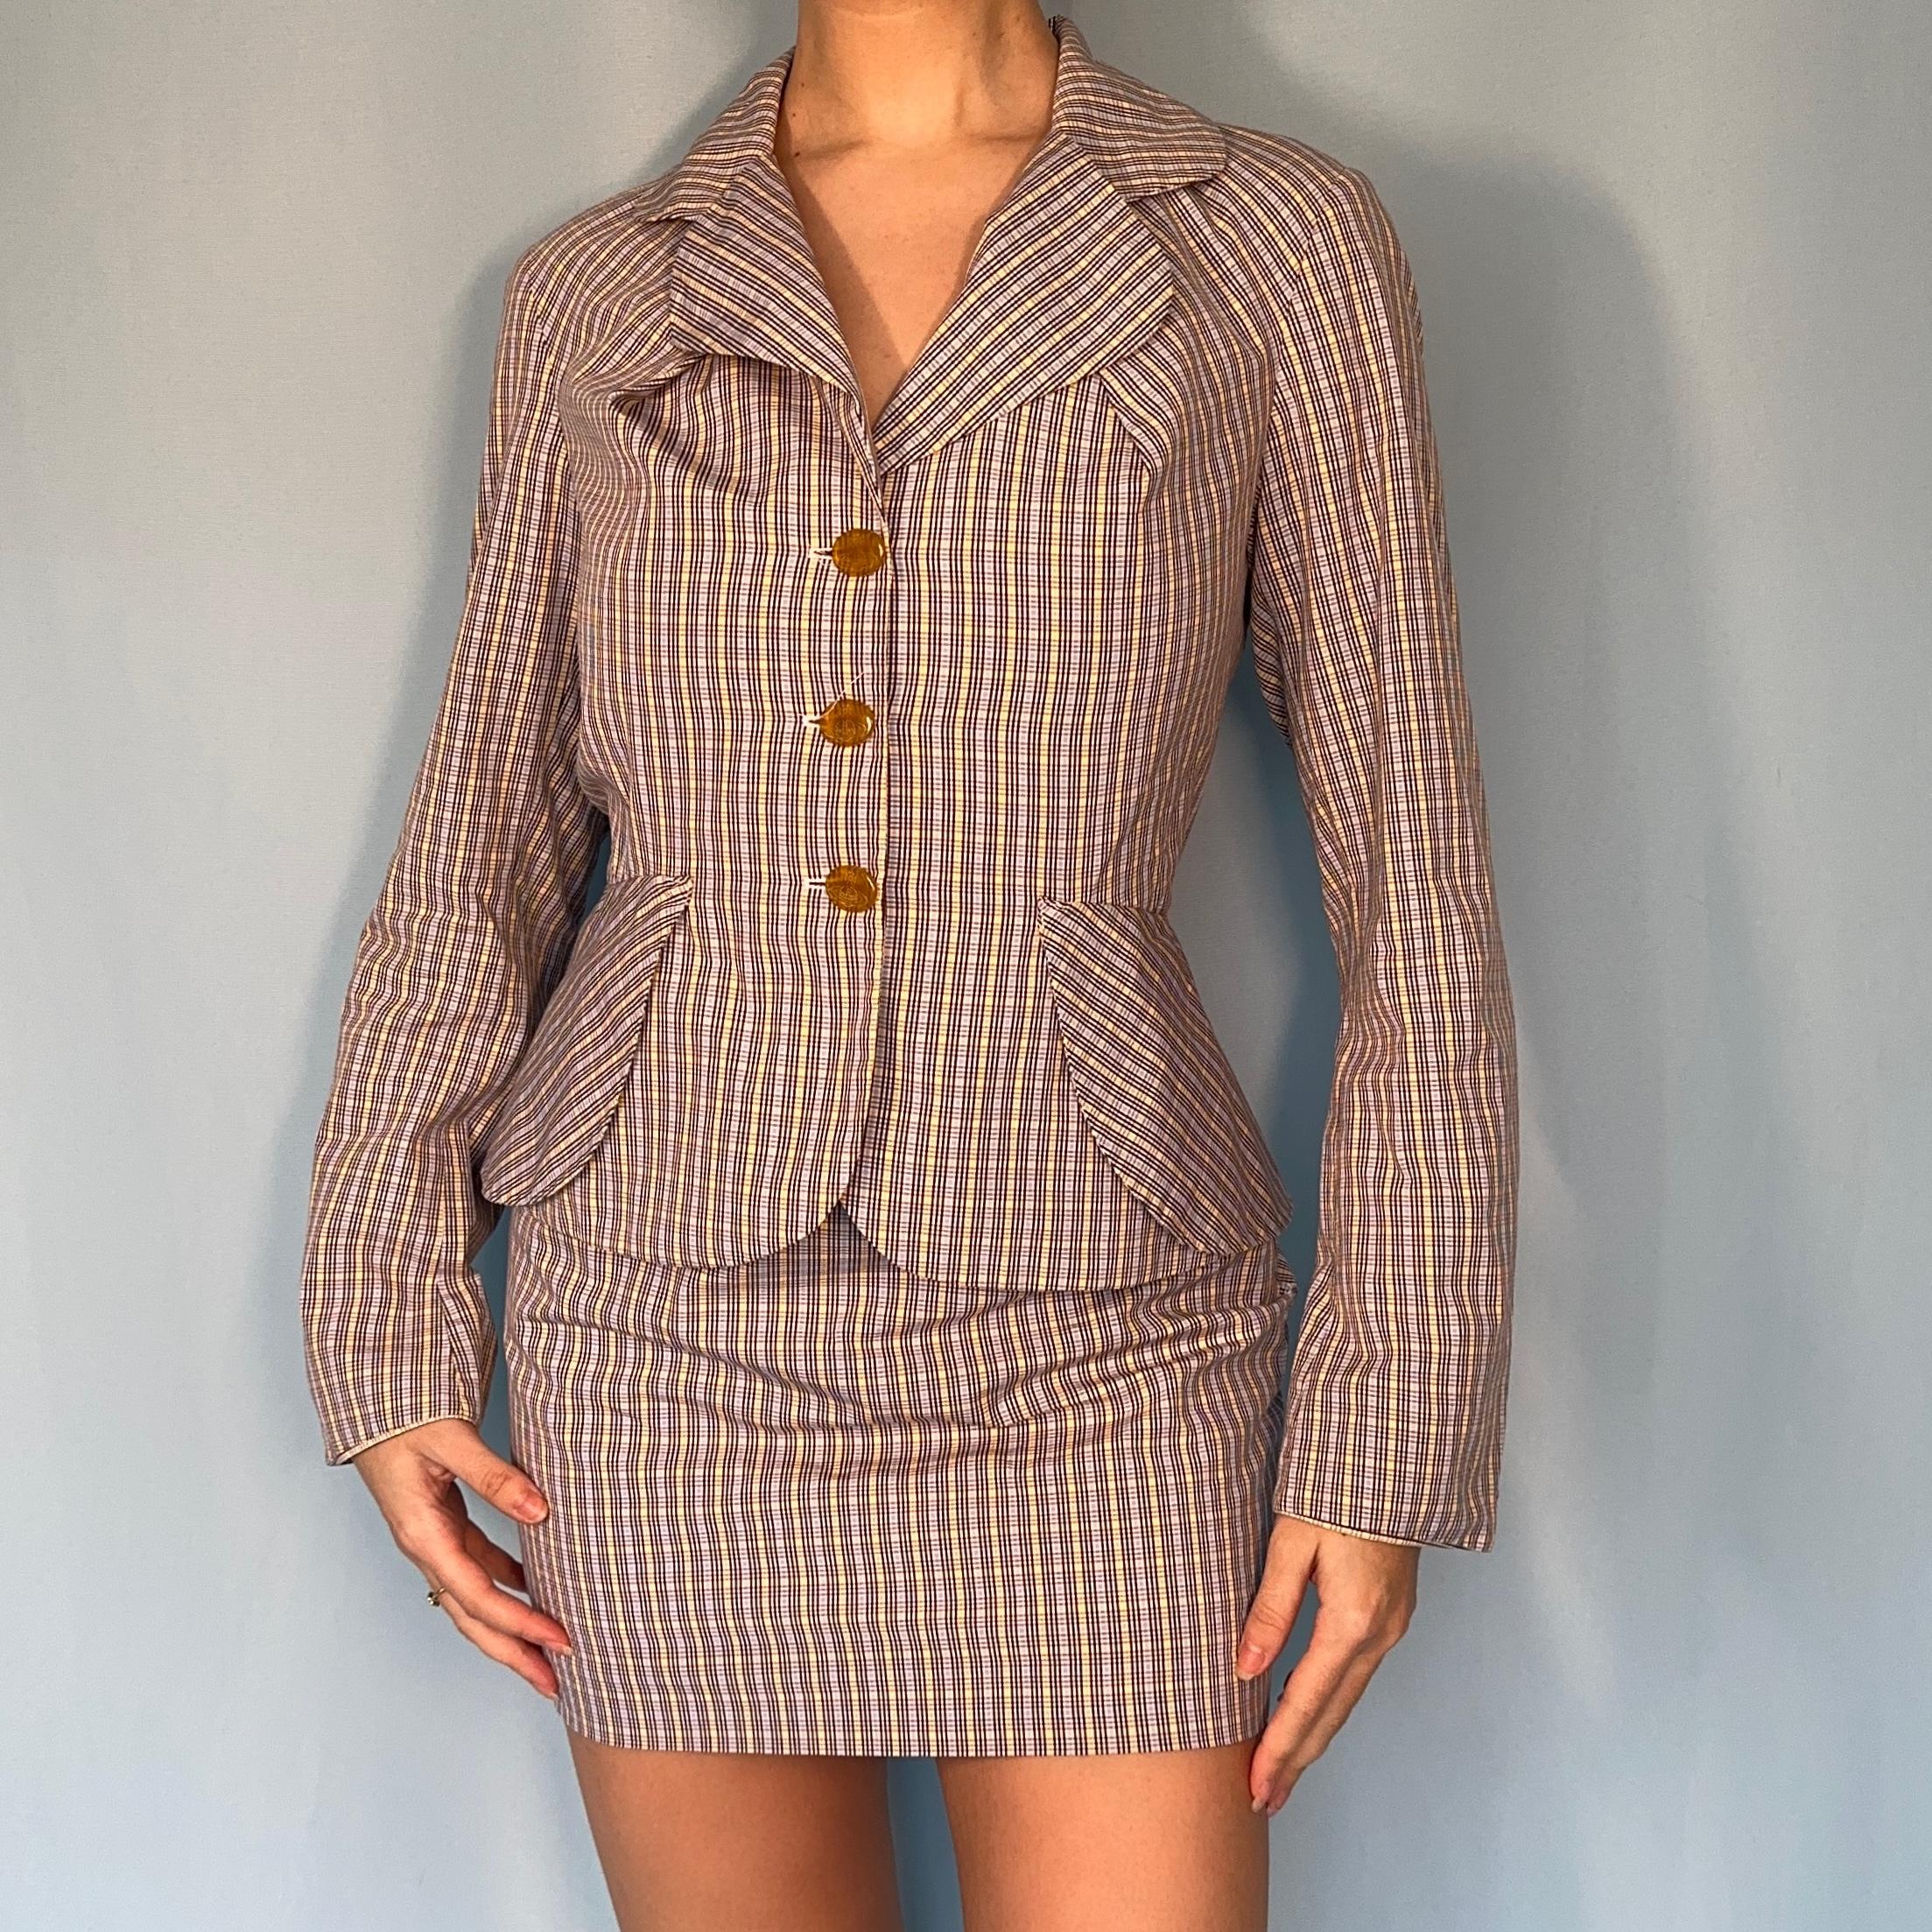 Vintage Vivienne Westwood

Spring 1994 “Cafe Society” collection 

Blue & yellow checked skirt & jacket suit set

Fitted blazer jacket 

High waisted mini skirt 

Zip up side of skirt 

Orb embossed buttons 

Size IT 40 / UK 8 / US 4

100% cotton